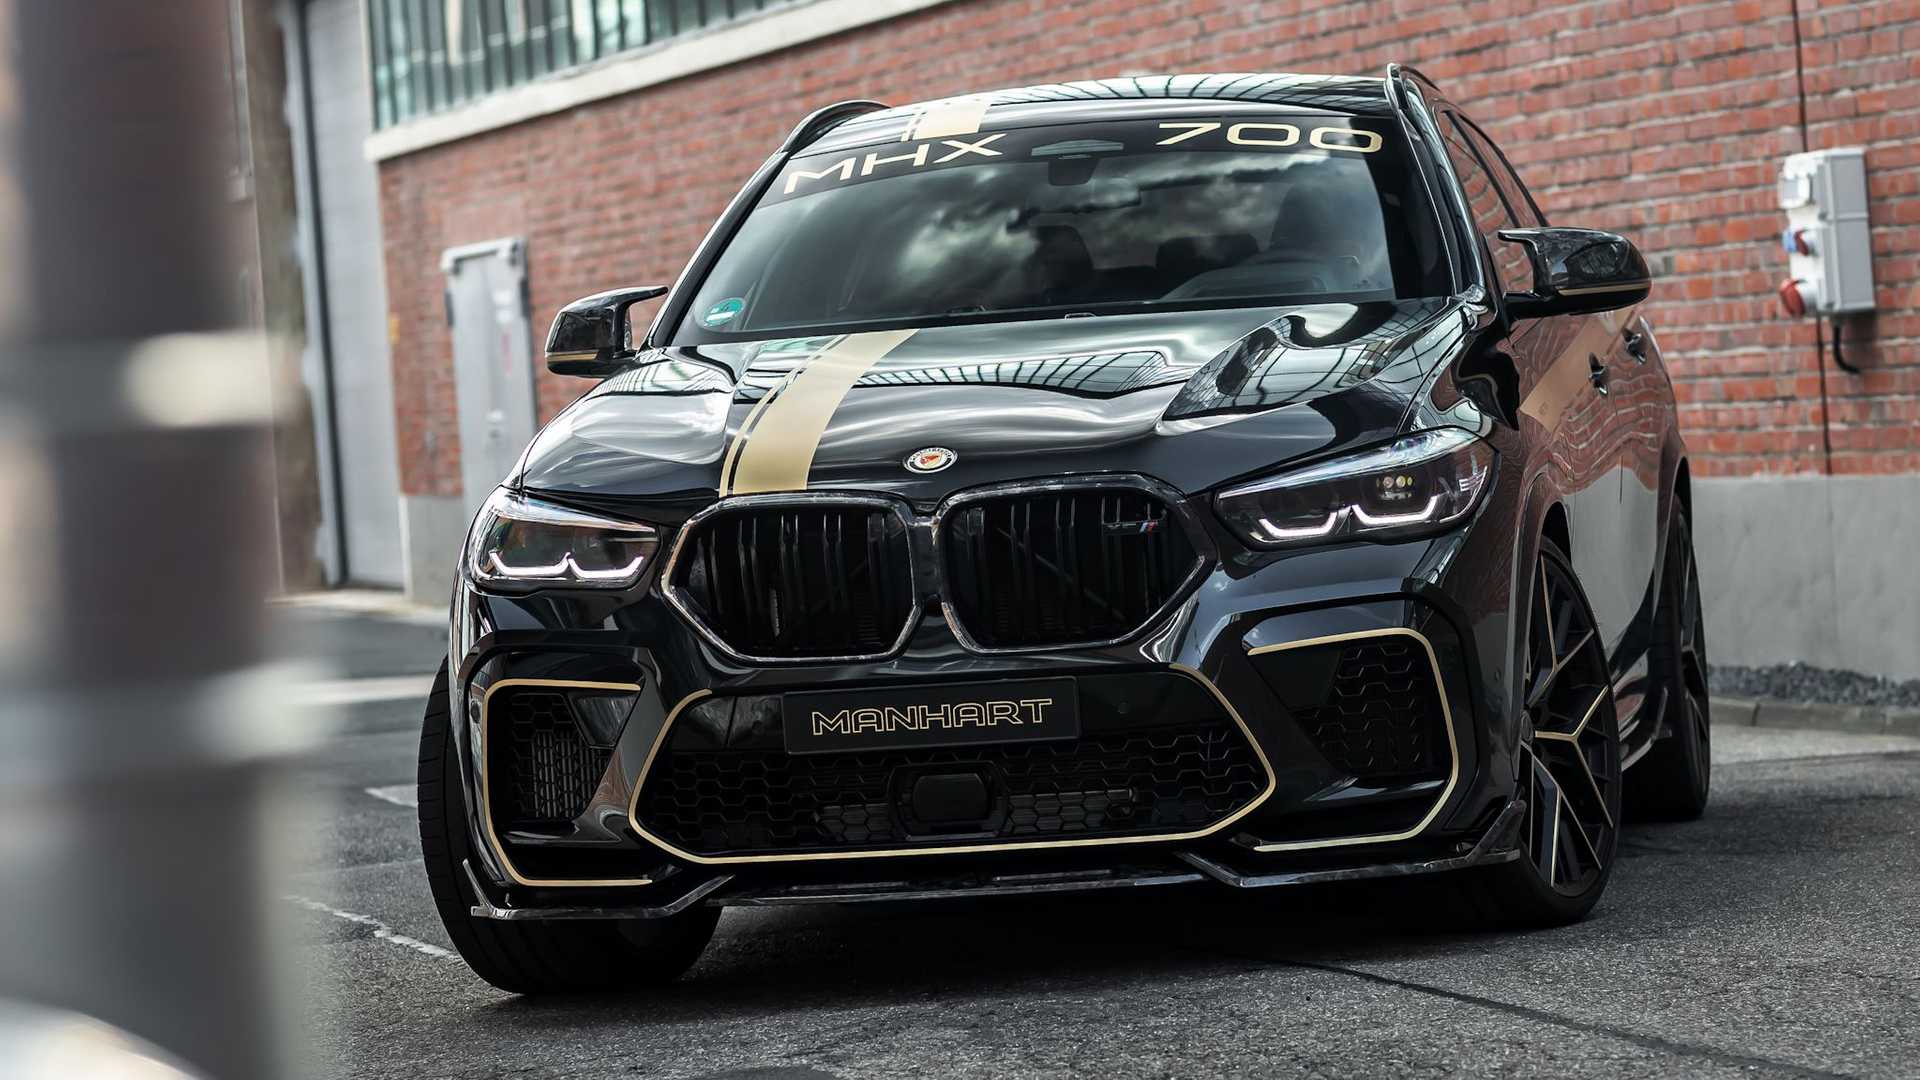 up to 730 hp for this wild BMW X6 M